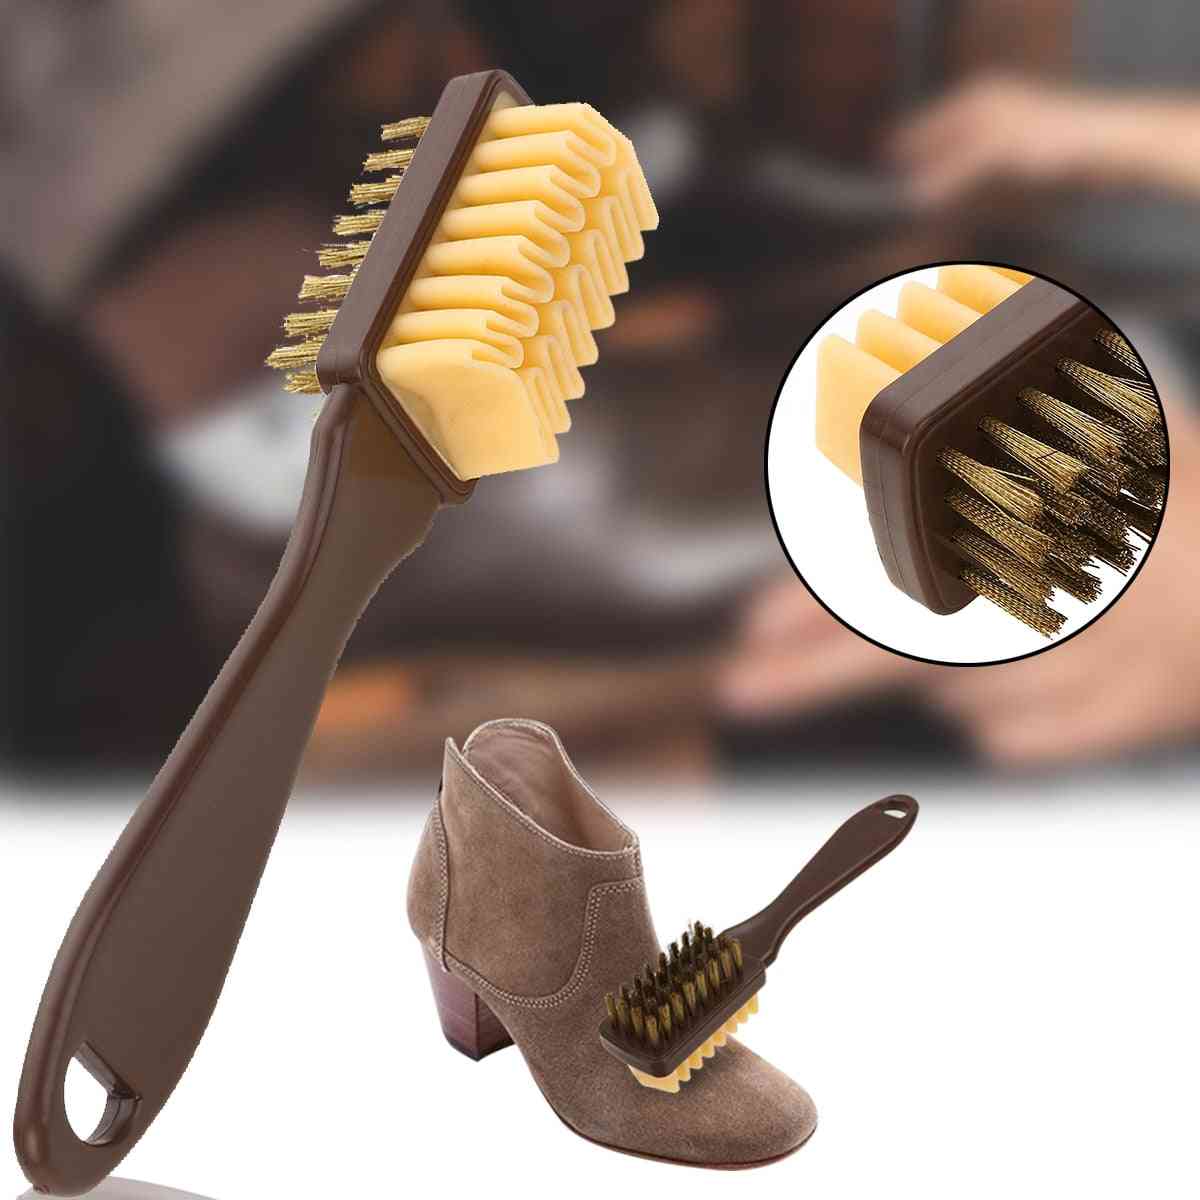 2 Sided Shoe Cleaning Brush - Rubber Eraser Nubuck Shoes Boot Cleaner